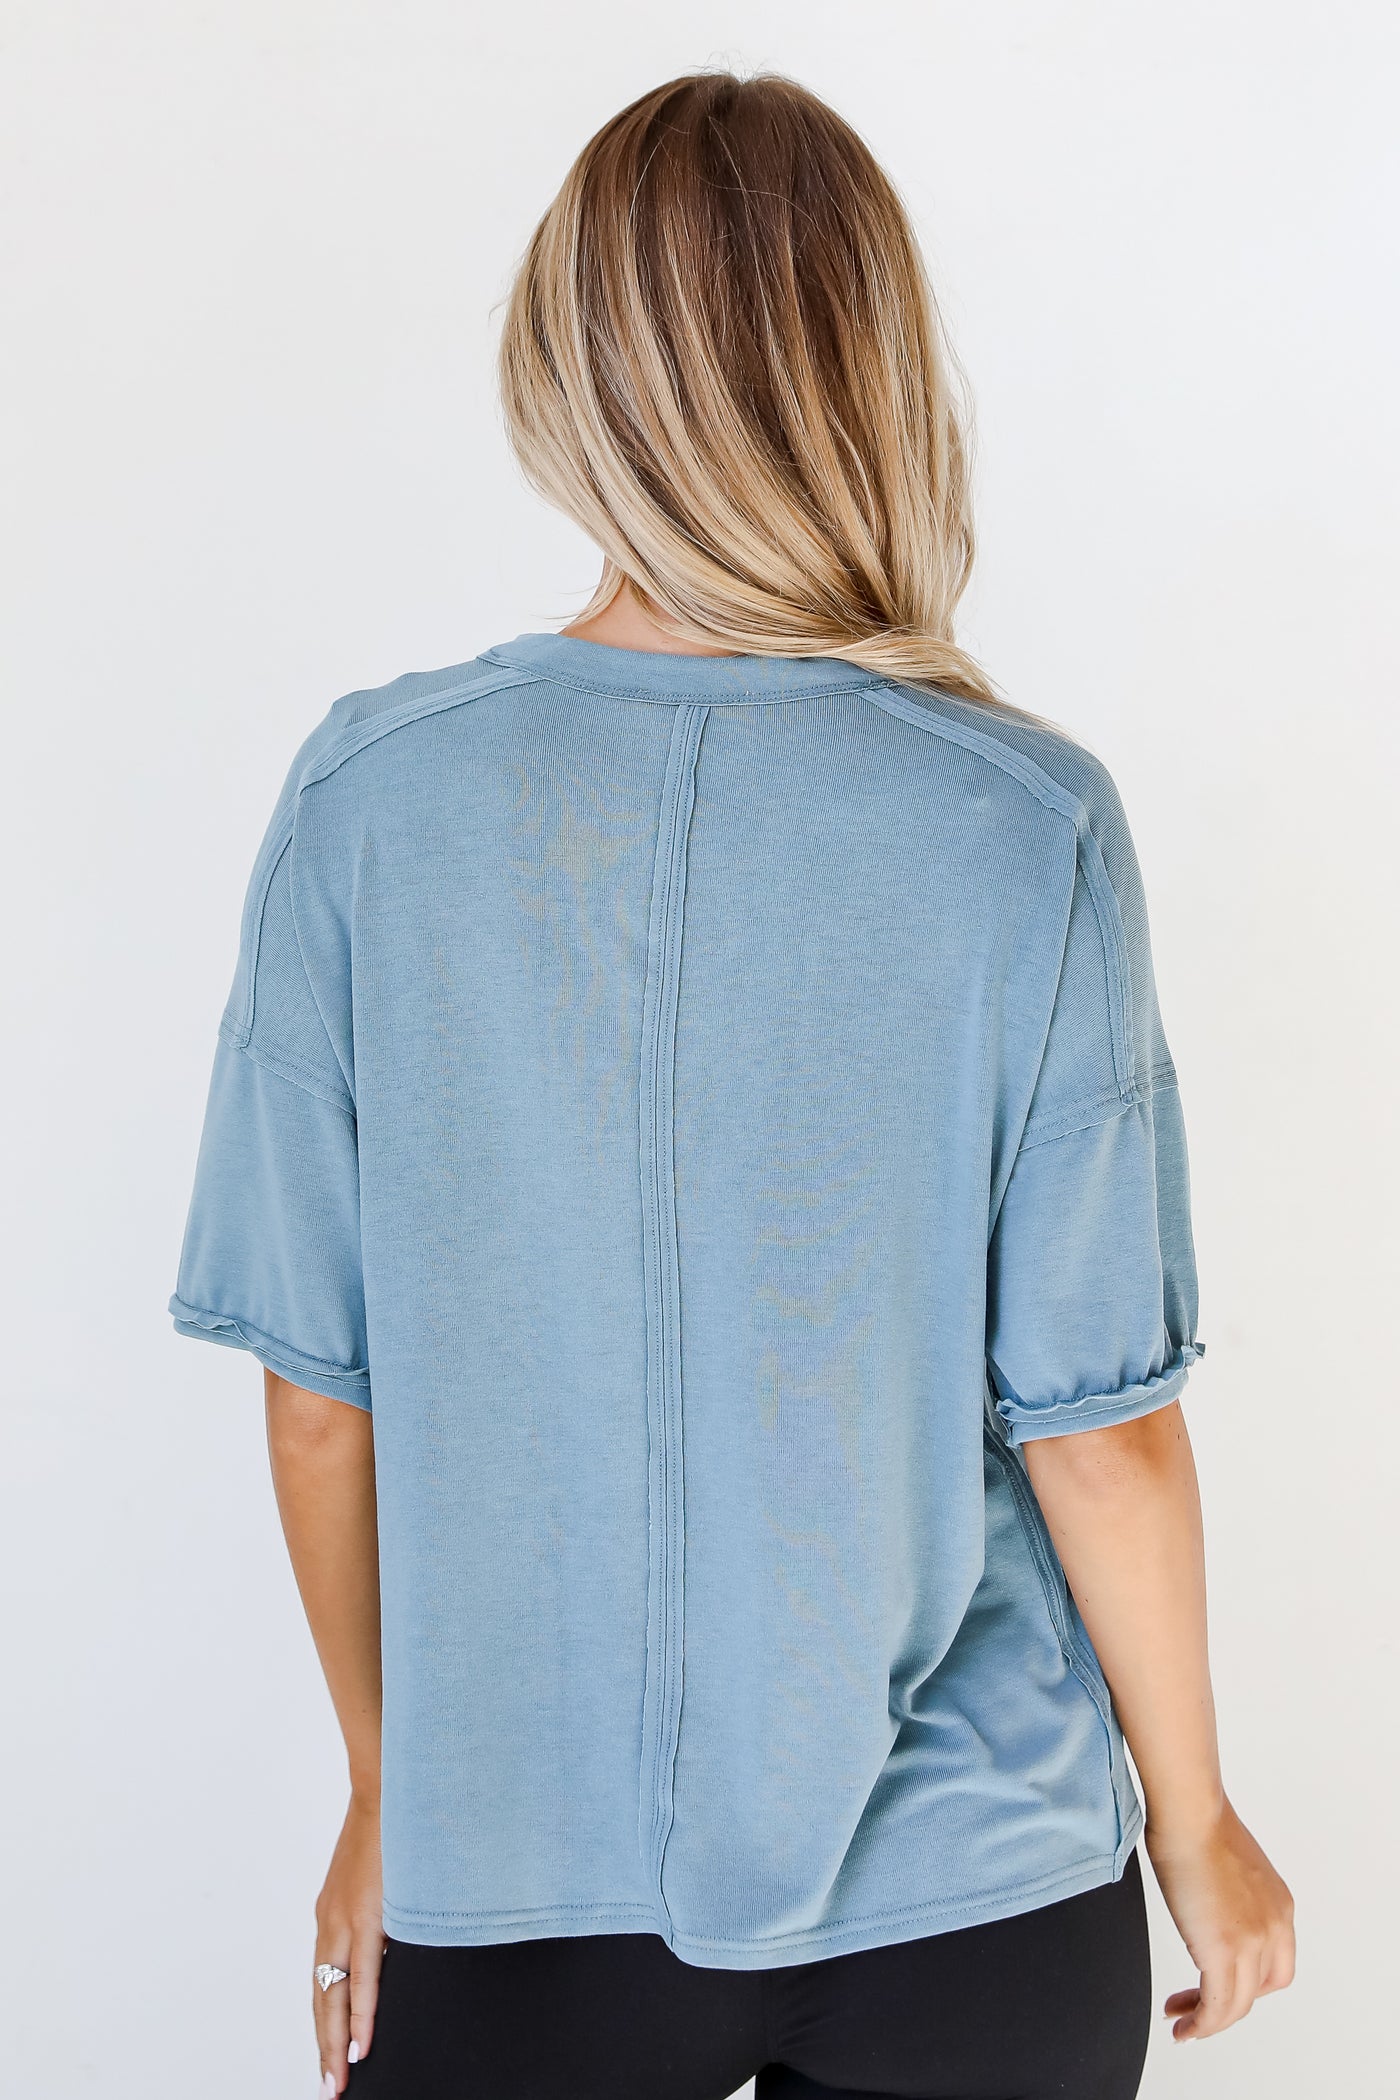 blue Pocket Tee back view